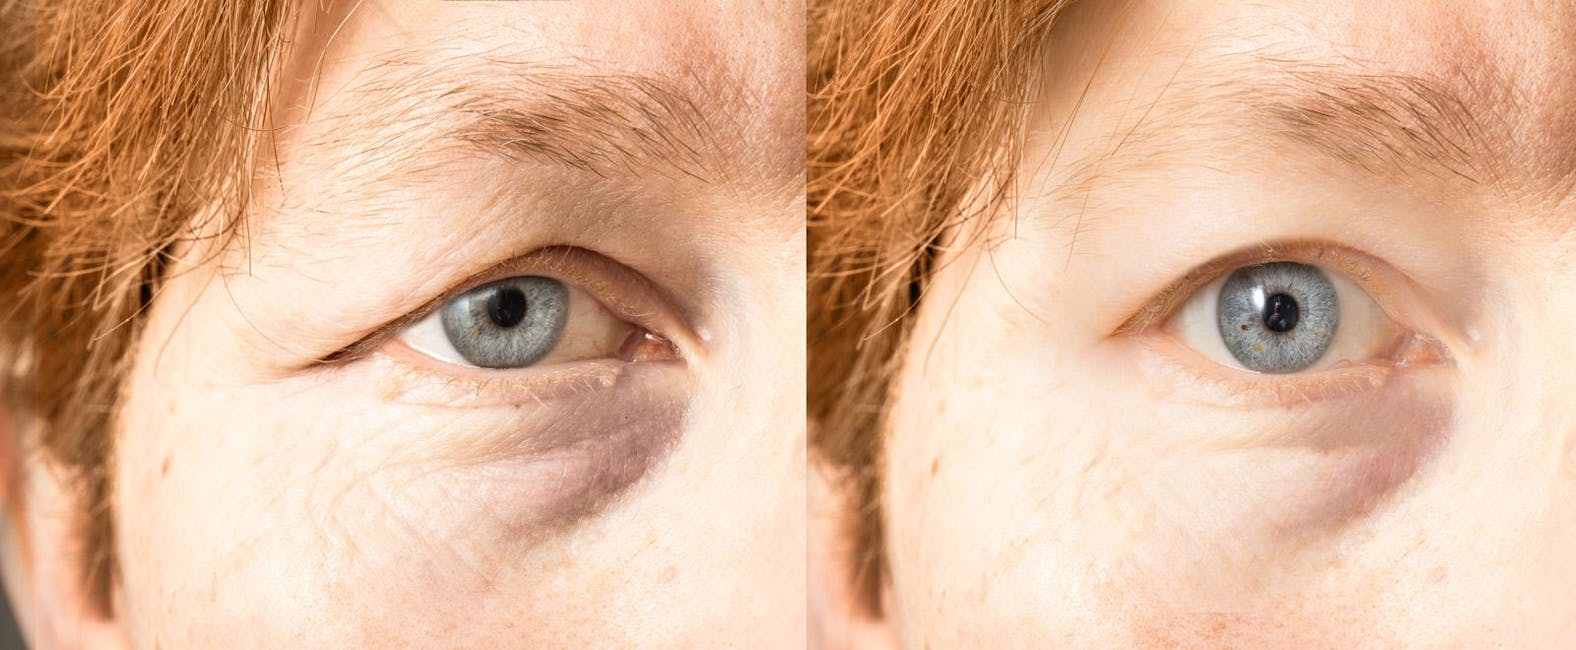 Before & After Results at Arizona Eye Institute & Cosmetic Laser Center | Sin City, AZ